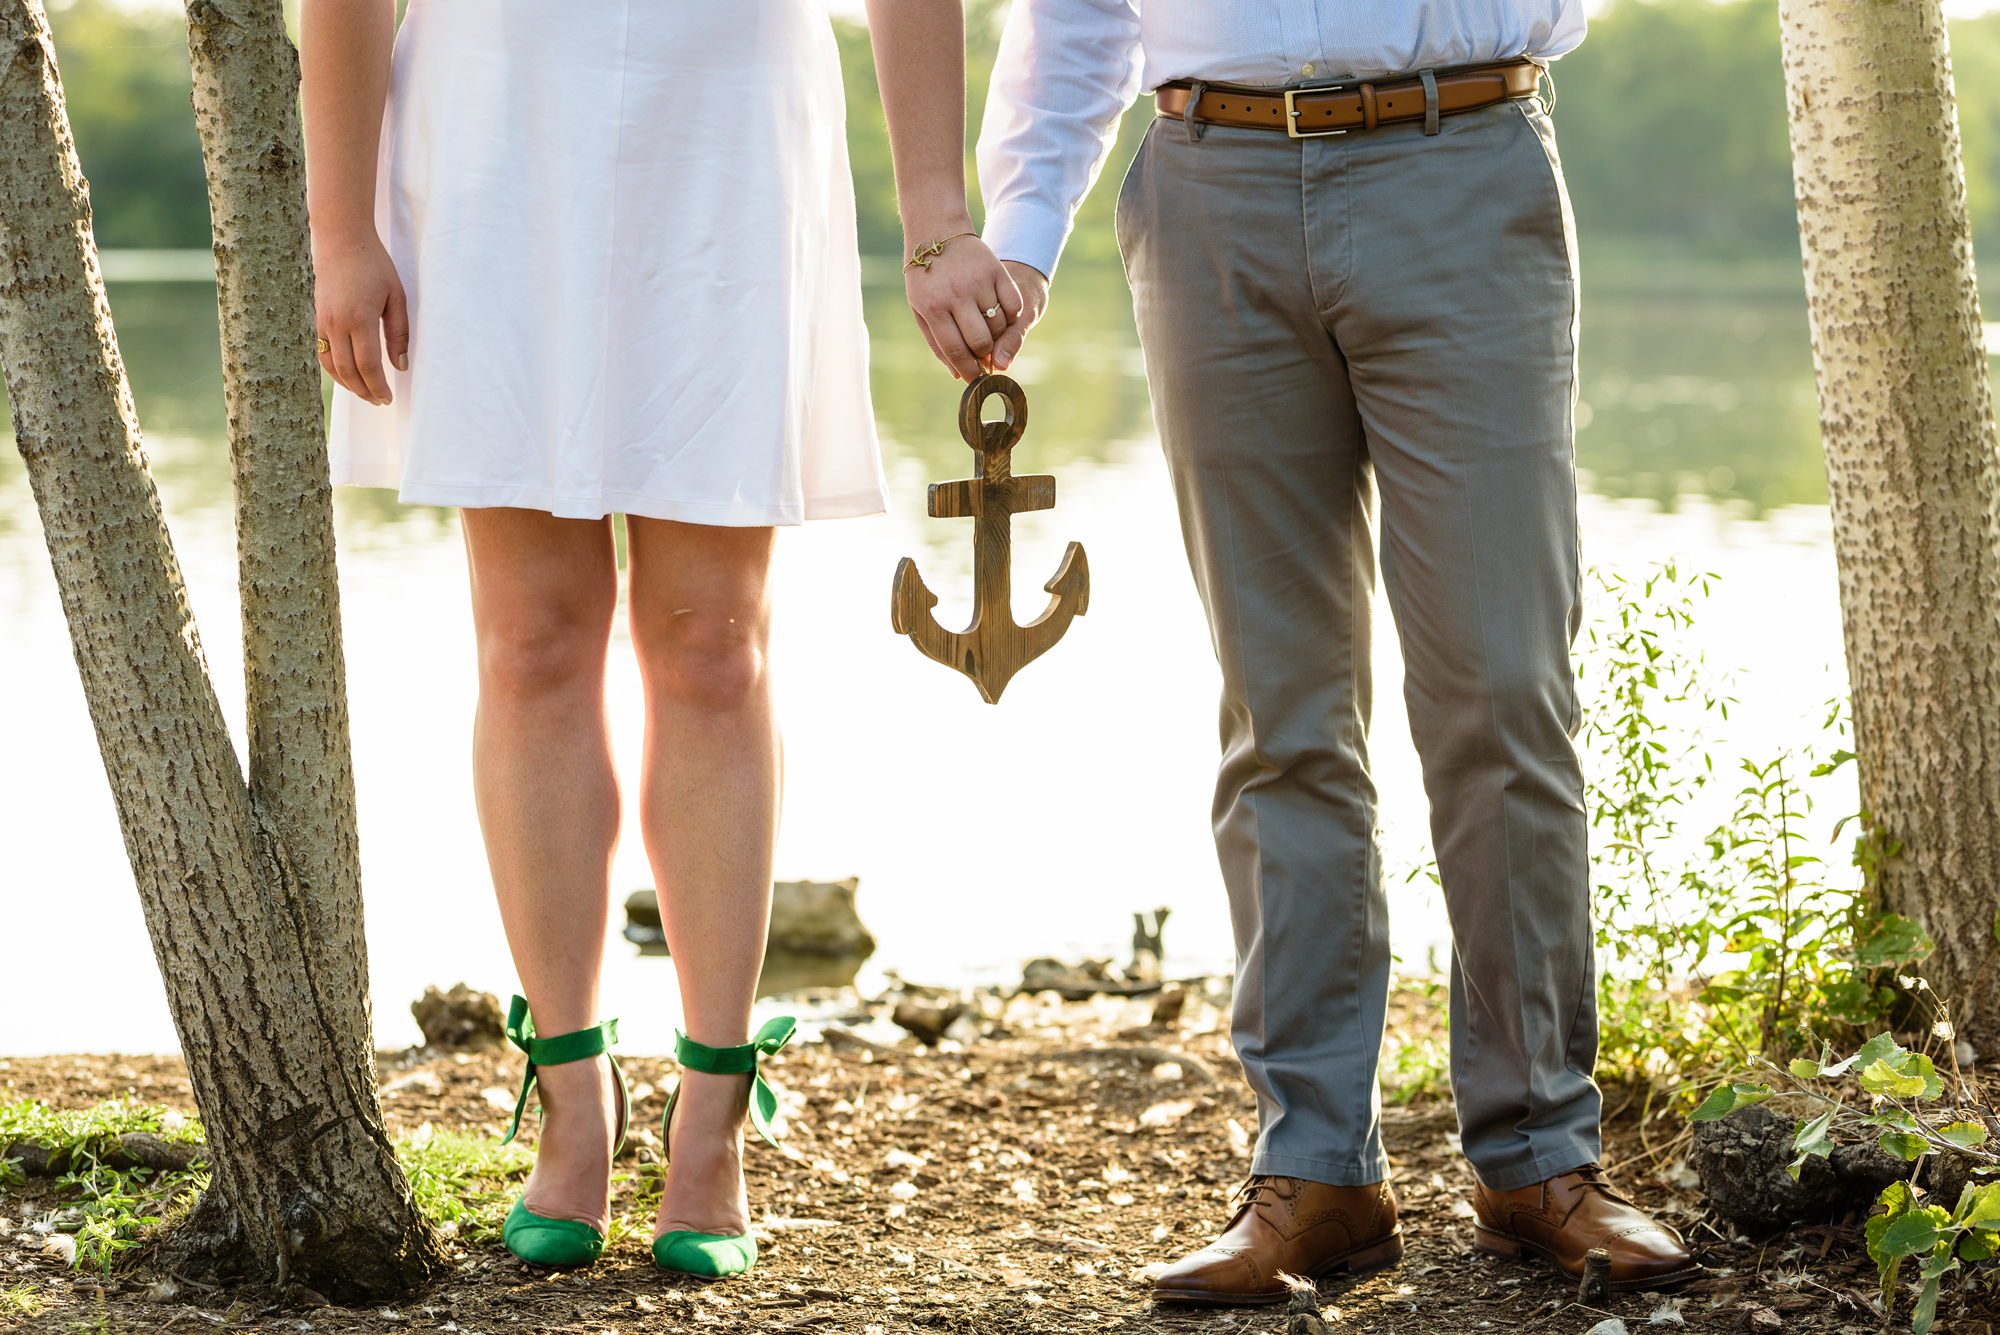 anchor as a prop in an engagement session